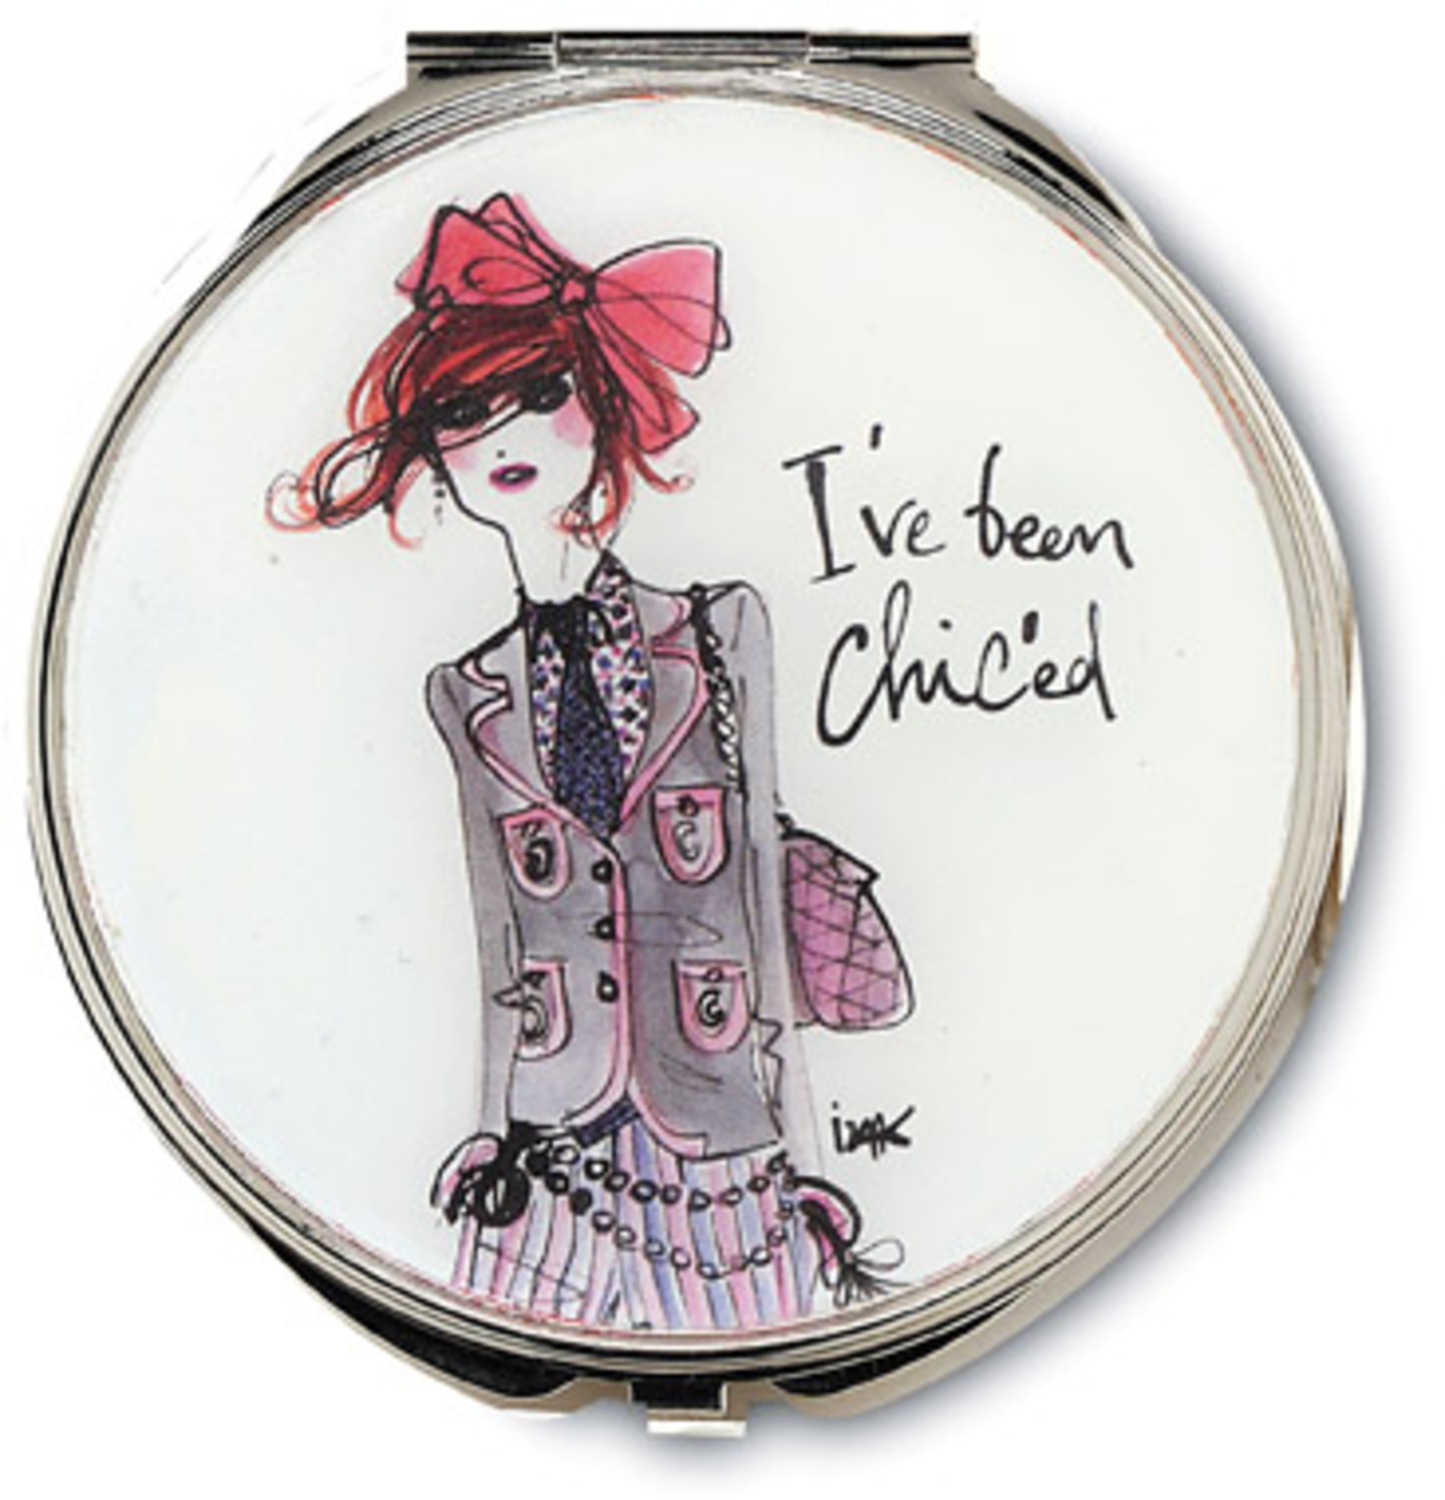 I've Been Chic'ed by IZAK - I've Been Chic'ed - 2.75" Compact Mirror